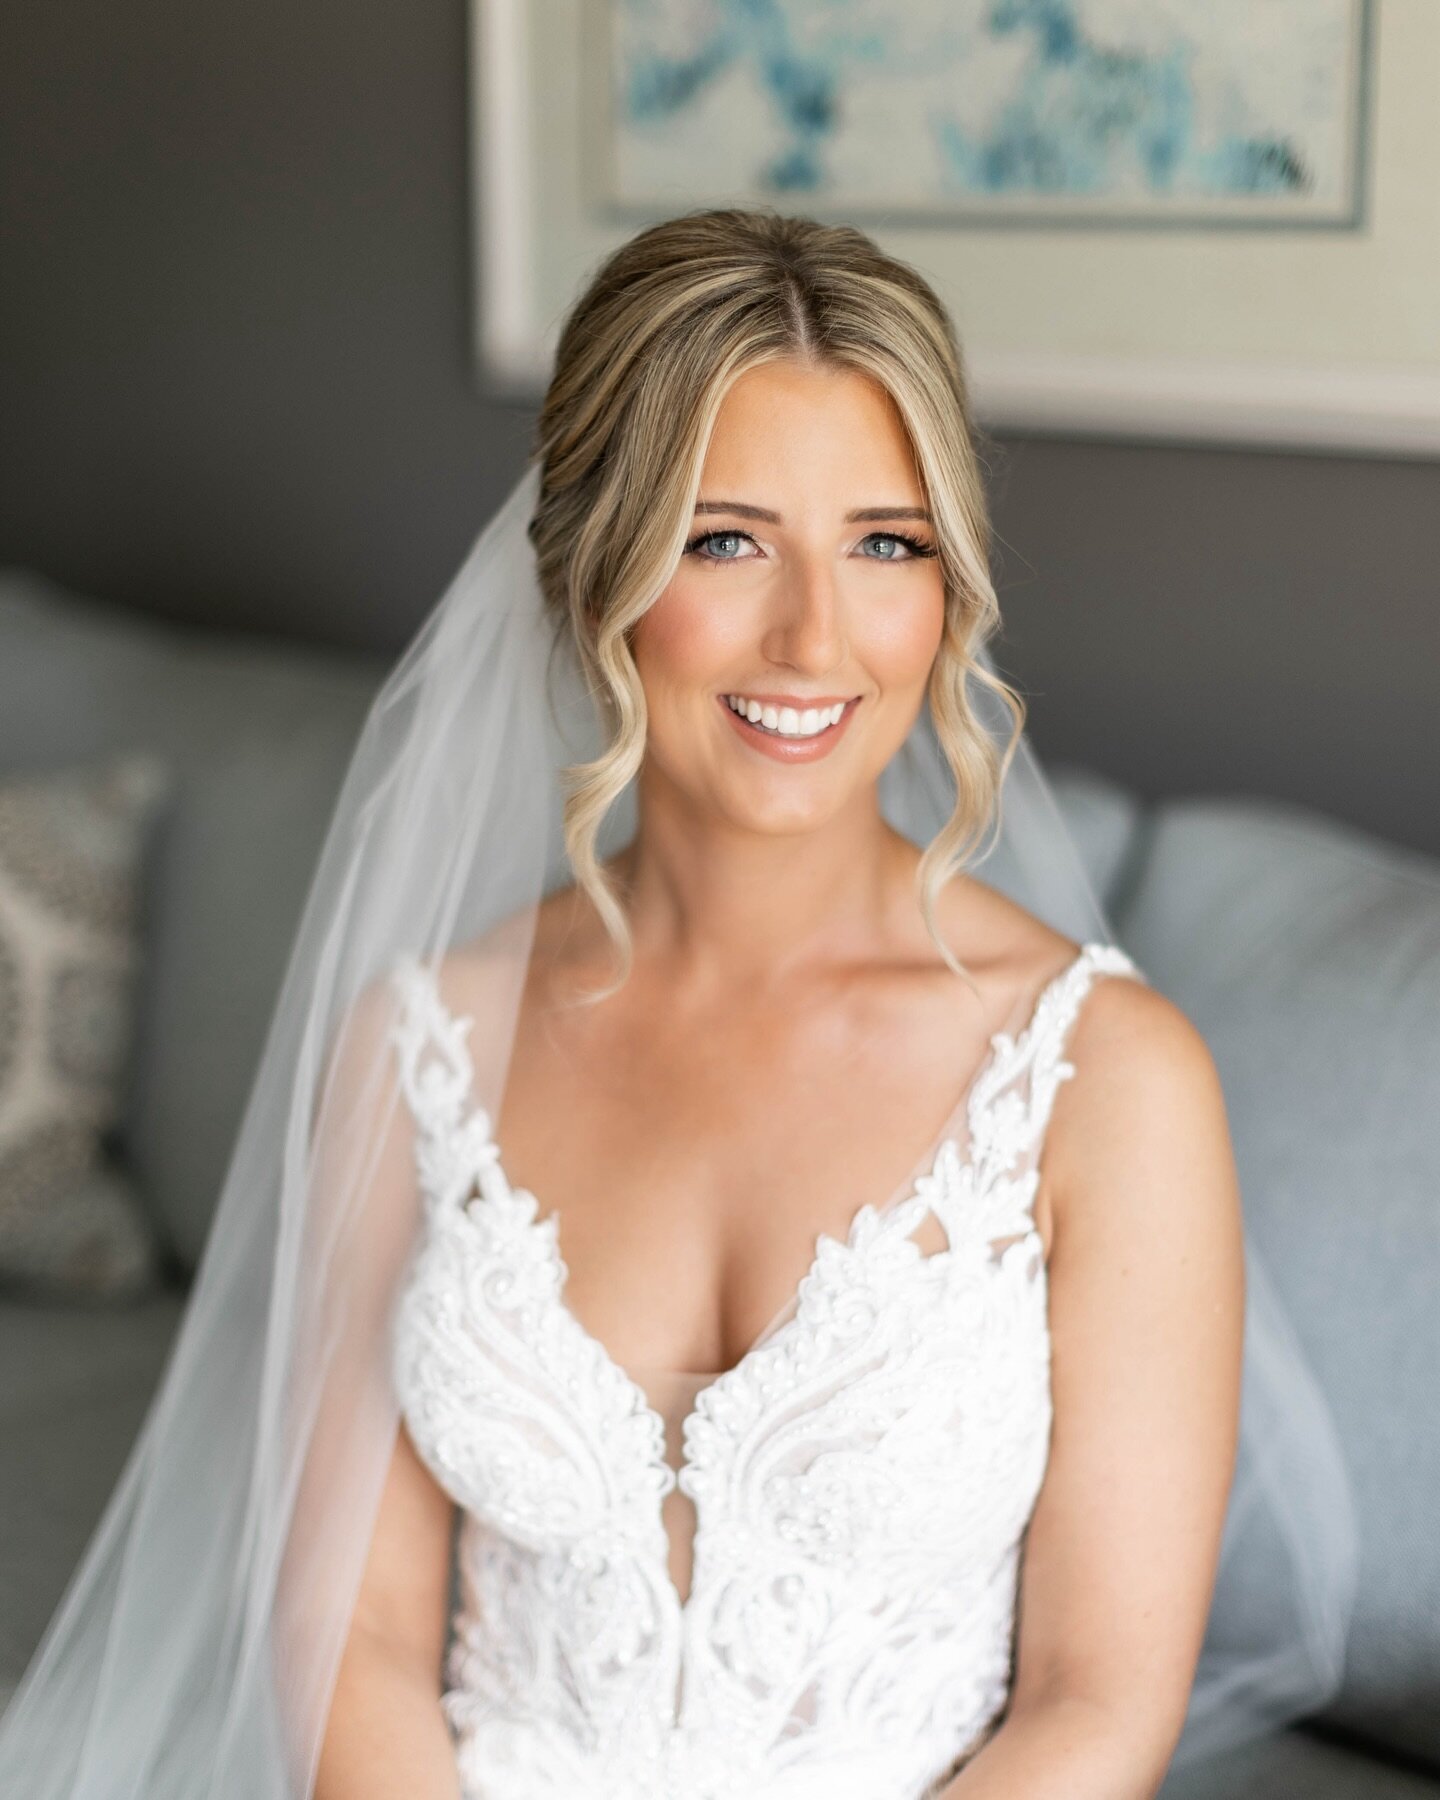 So looking forward to more spring beauty&rsquo;s like this 🤍 will never ever get over you Kathy ✨

Photo: @danielle_harris_photography 
Makeup: @makeupbyamericaf 
Hair: @emilyraebridalhair 
Venue: @haleymansion 
.
.
.
.
.
#makeupbyamericaf #chicagom